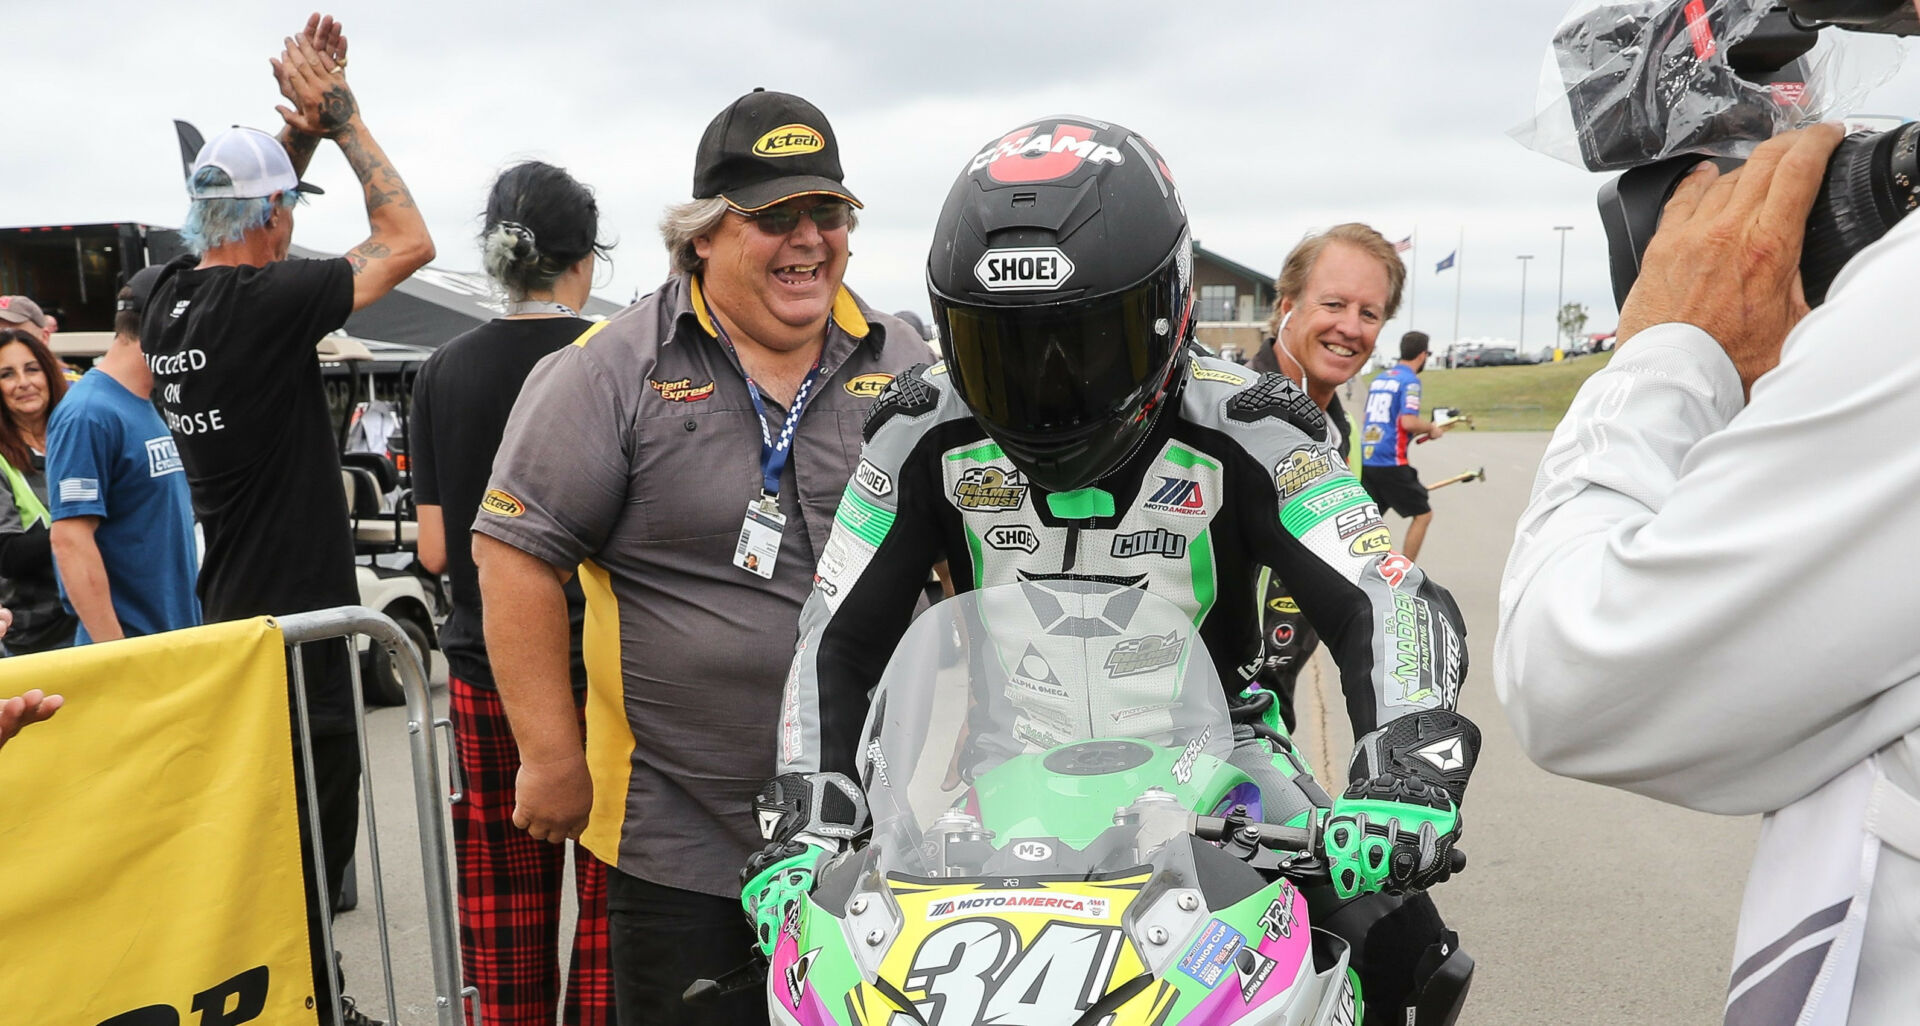 Cody Wyman is congratulated by his suspension tuner Lenny Albin (to Wyman's right) after winning MotoAmerica Junior Cup Race Two at Pittsburgh International Race Complex. Wyman went on to win the 2022 MotoAmerica Junior Cup Championship. Photo by Brian J. Nelson.